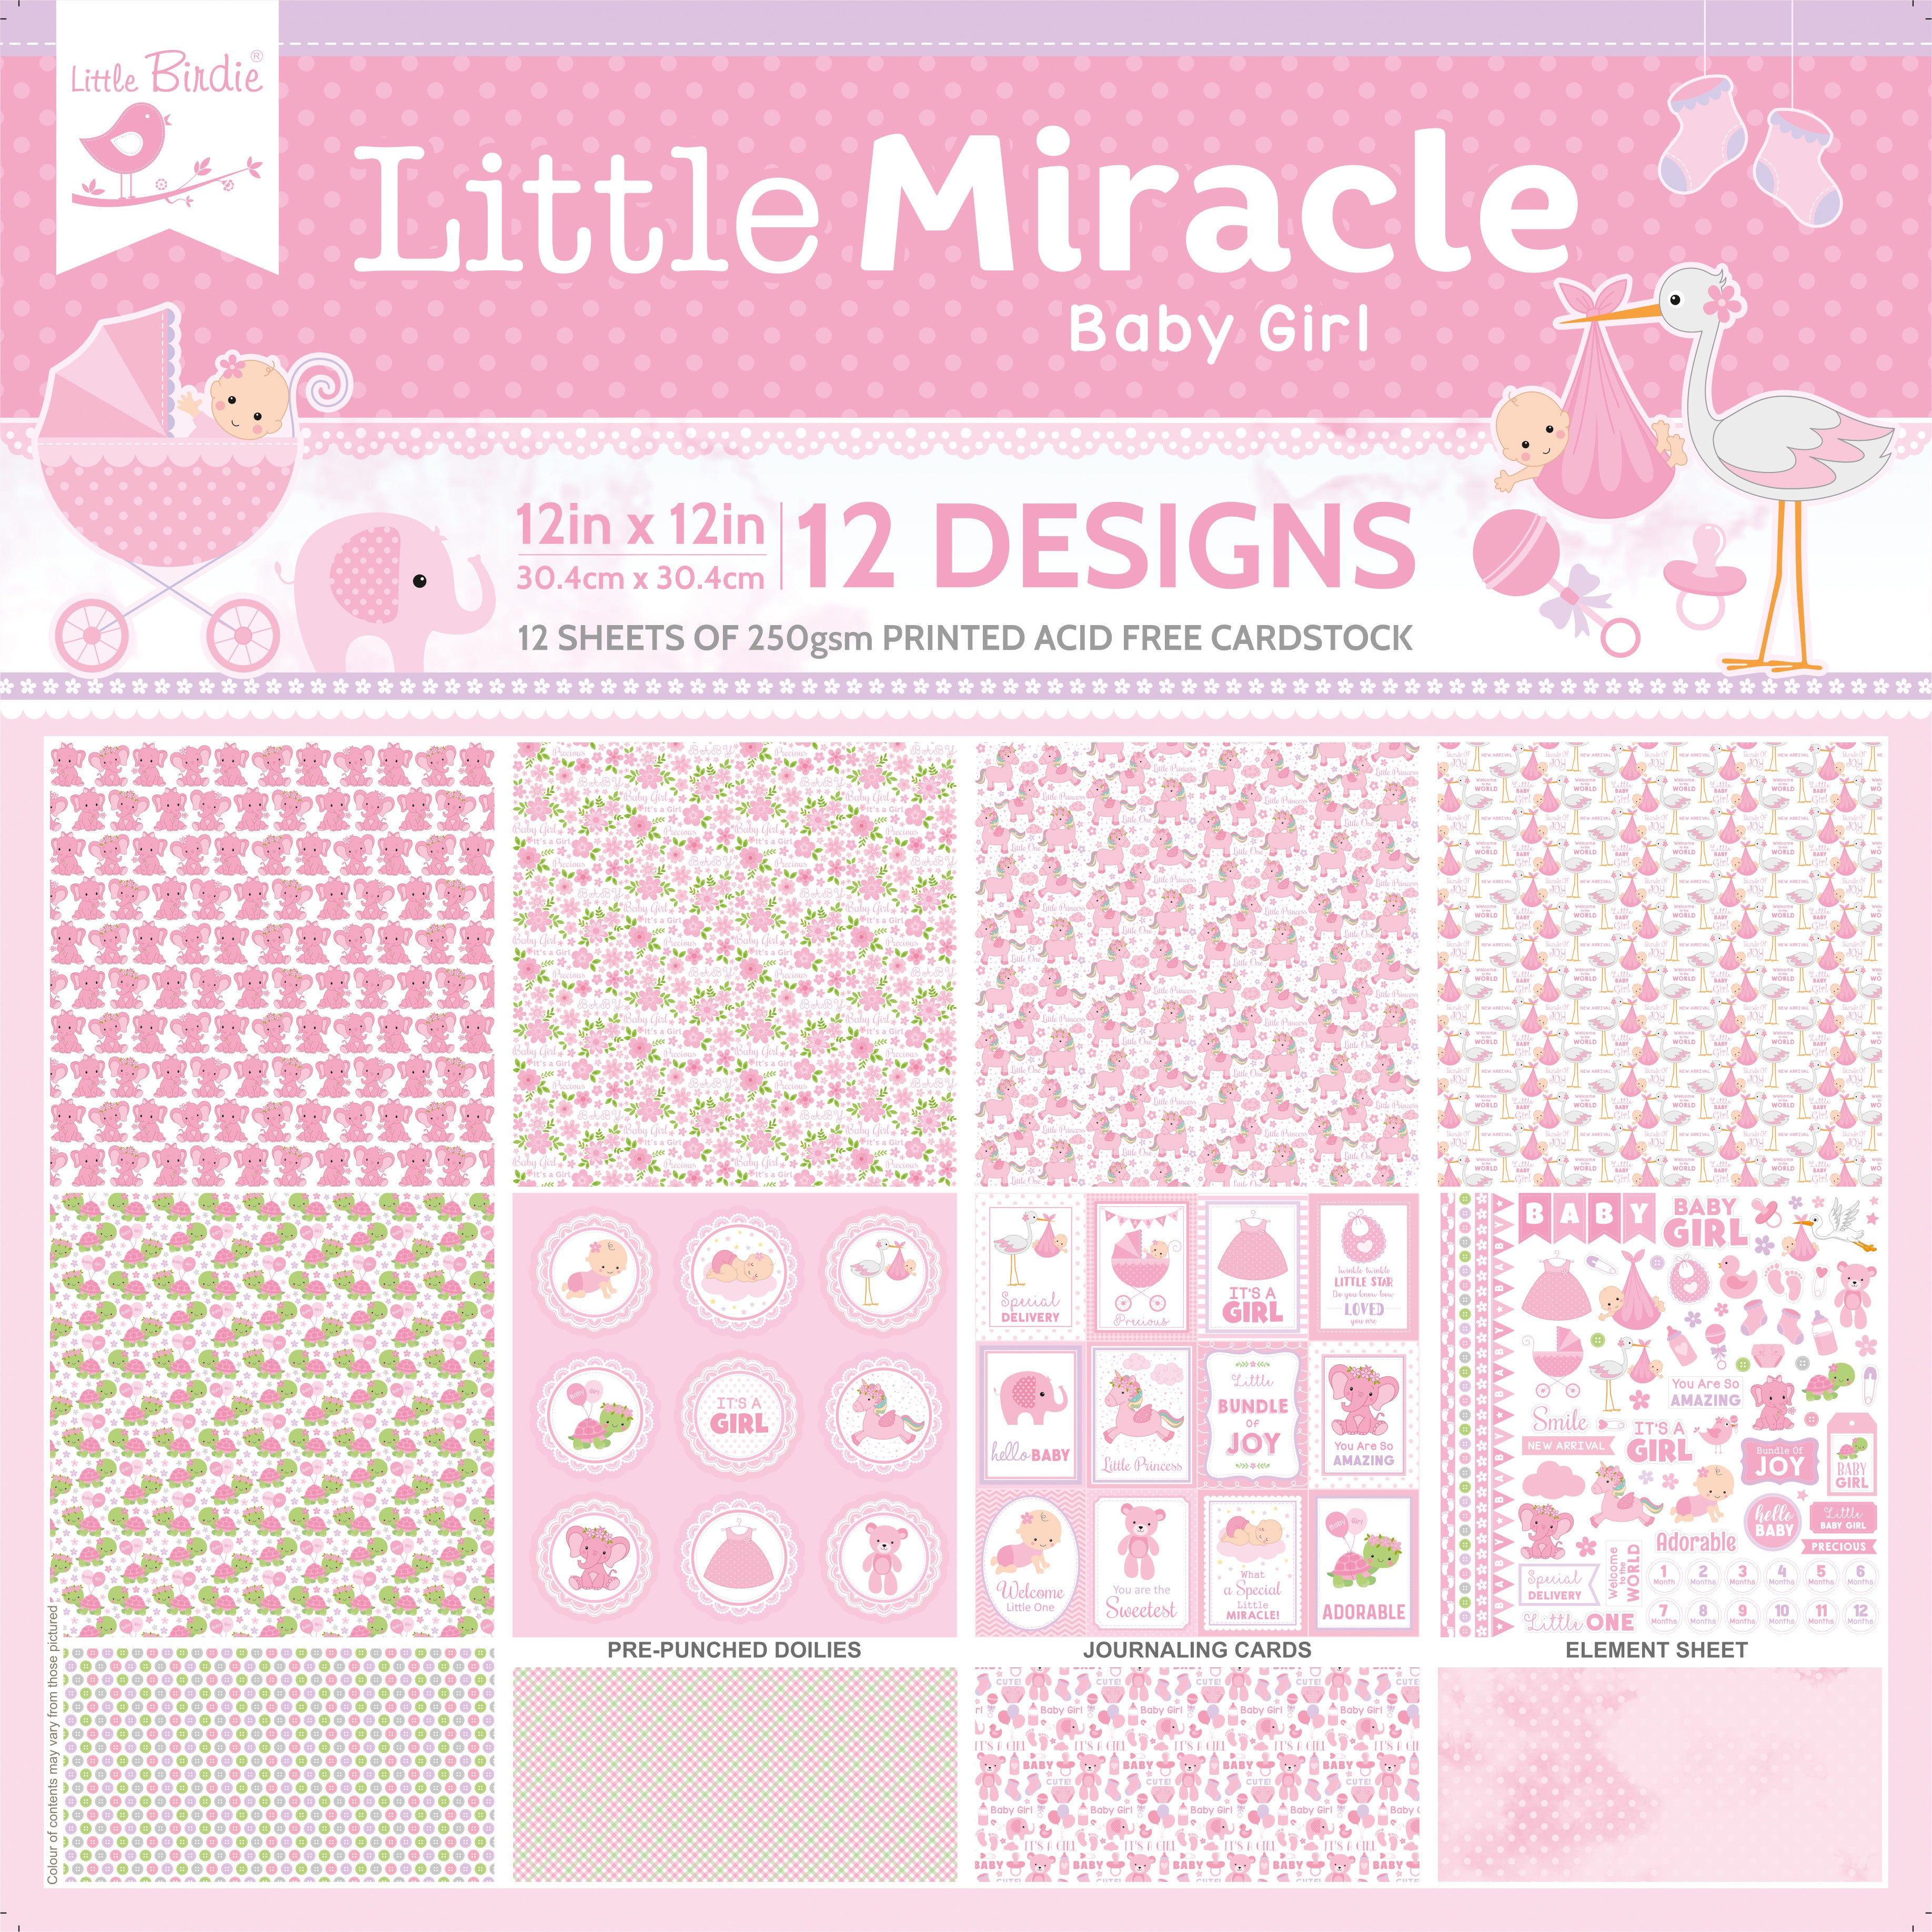 12 x12 inch Printed Cardstock pack- Little Miracle Baby Girl, 12 Sheets, 12 Designs, 250 gsm